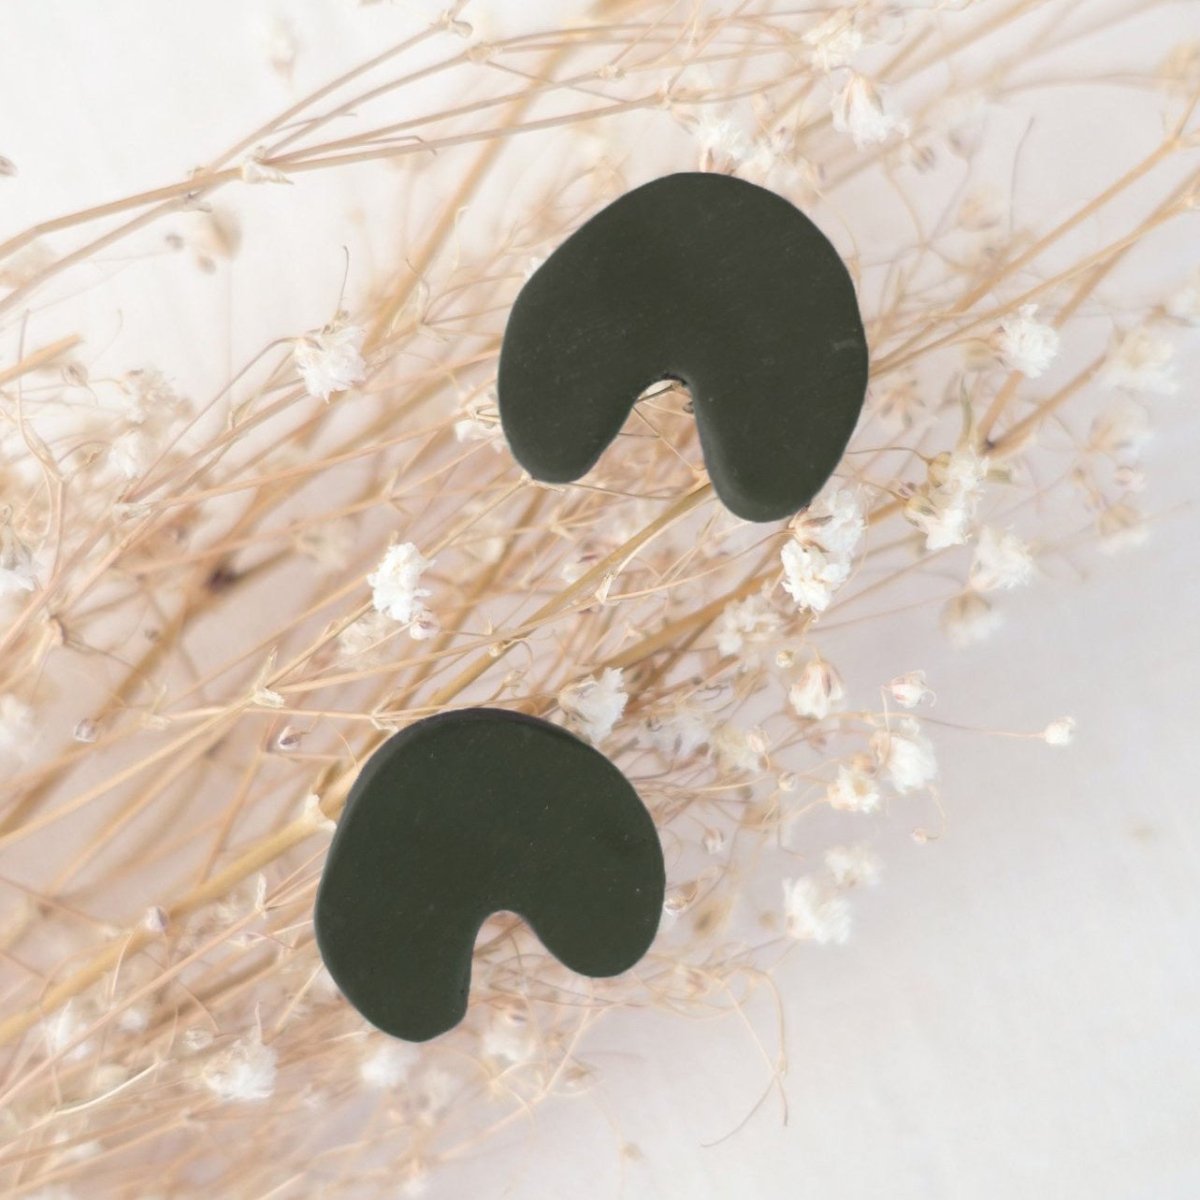 Arch shaped stud earrings made of polymer clay in the shade Aurora Green. Made in Los Angeles, California by Hey Moon Designs.